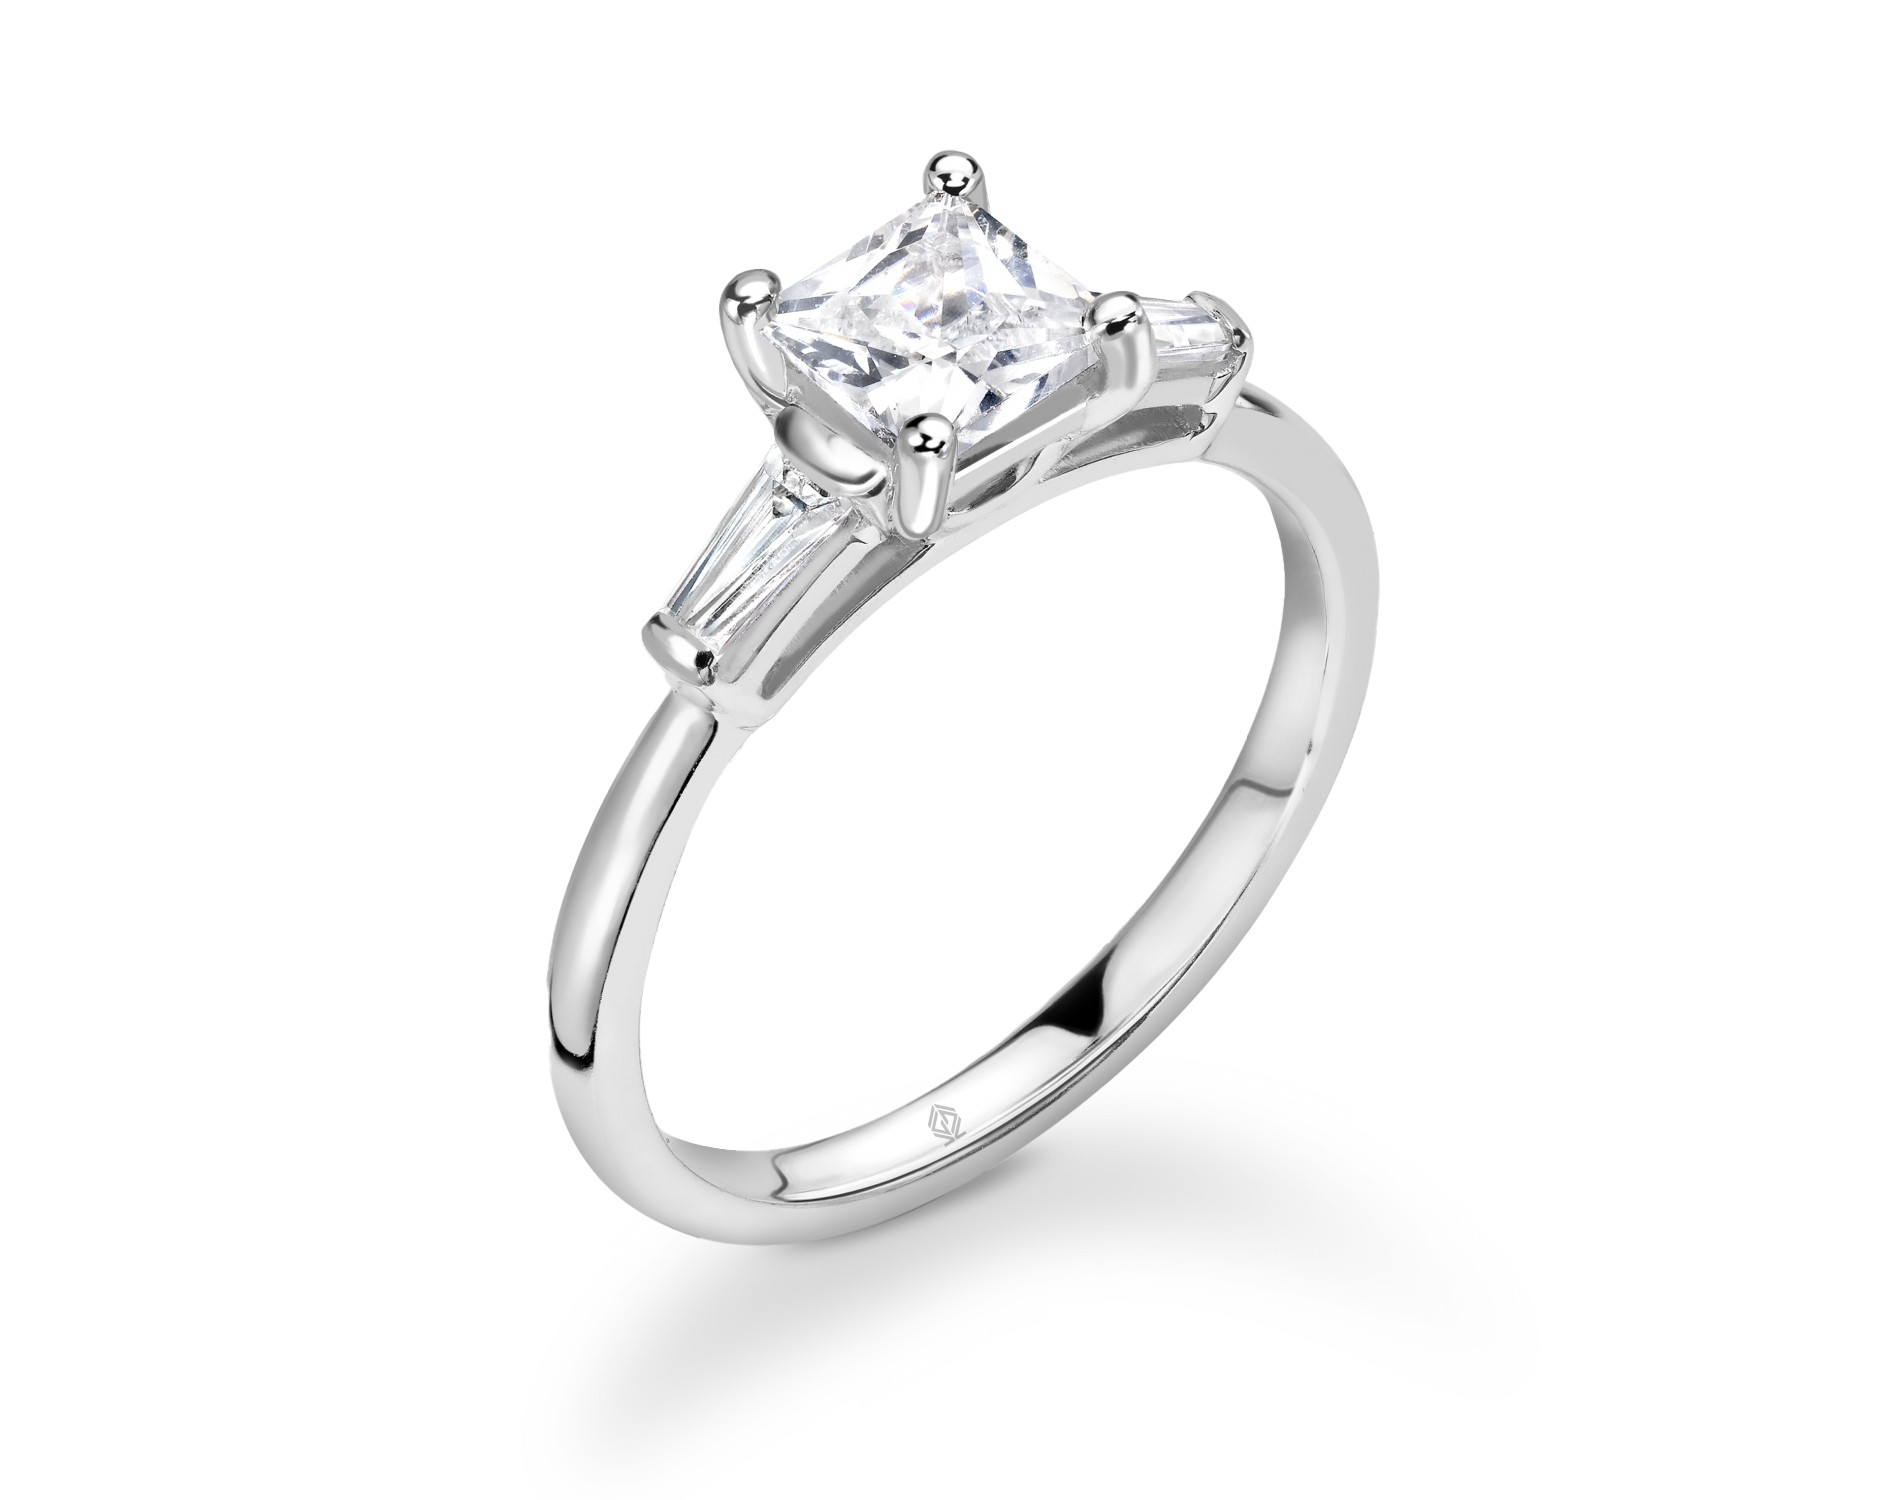 18K WHITE GOLD PRINCESS CUT 4 PRONGS DIAMOND ENGAGEMENT RING WITH BAGUETTES CUT SIDE STONES